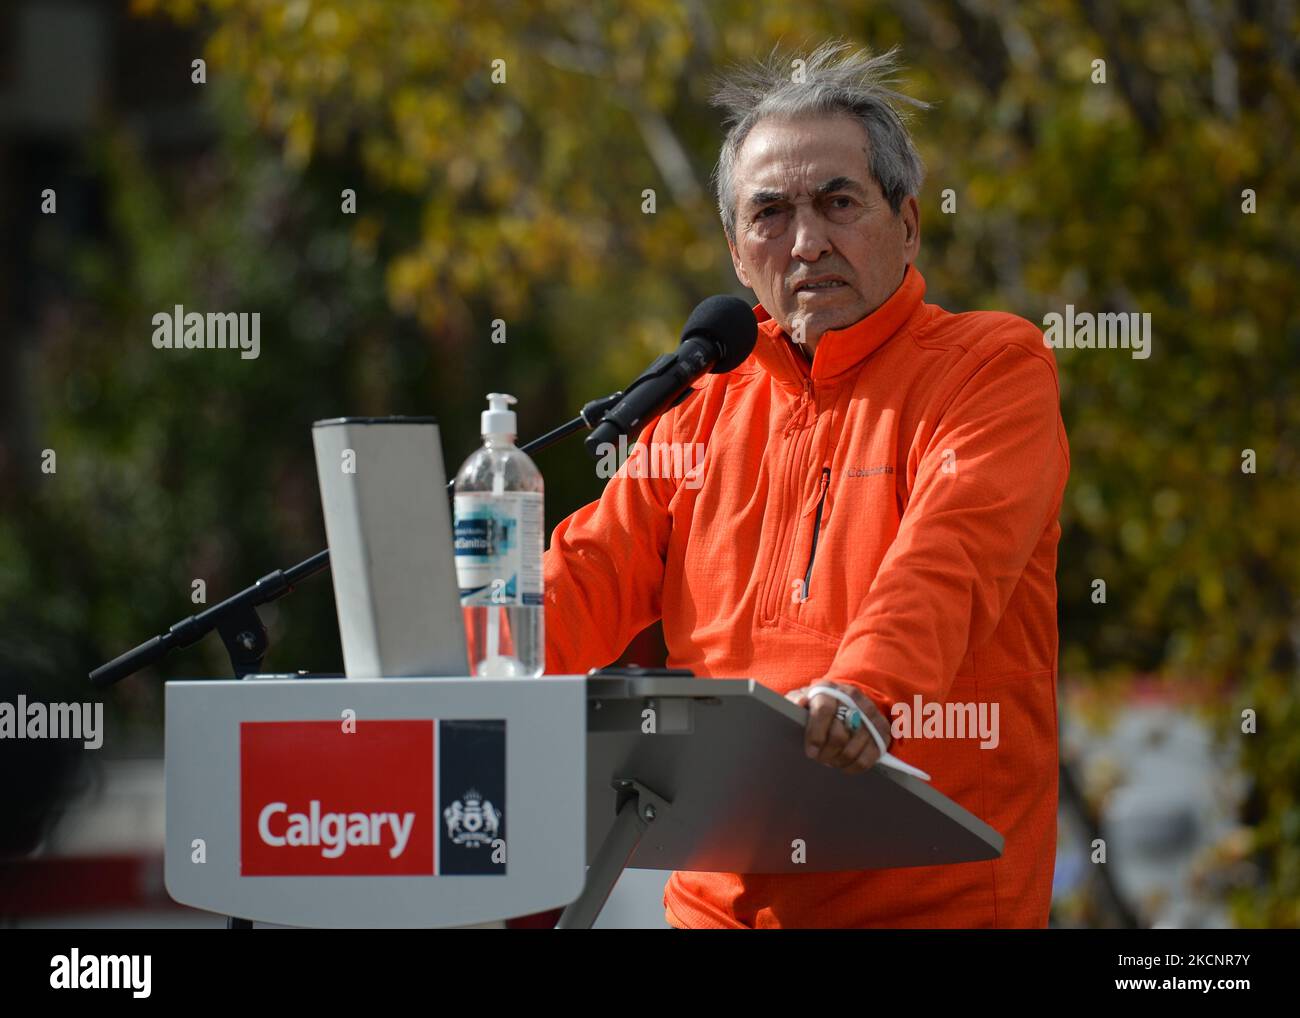 Phil Fontaine, an Aboriginal Canadian leader and a former National Chief of the Assembly of First Nations, speaks during an outdoor official ceremony at Fort Calgary, as the City of Calgary commemorates Orange Shirt Day, and observes the first National Day for Truth and Reconciliation (a federal statutory holiday). On Thursday, 30 September 2021, in Fort Calgary, Calgary, Alberta, Canada. (Photo by Artur Widak/NurPhoto) Stock Photo